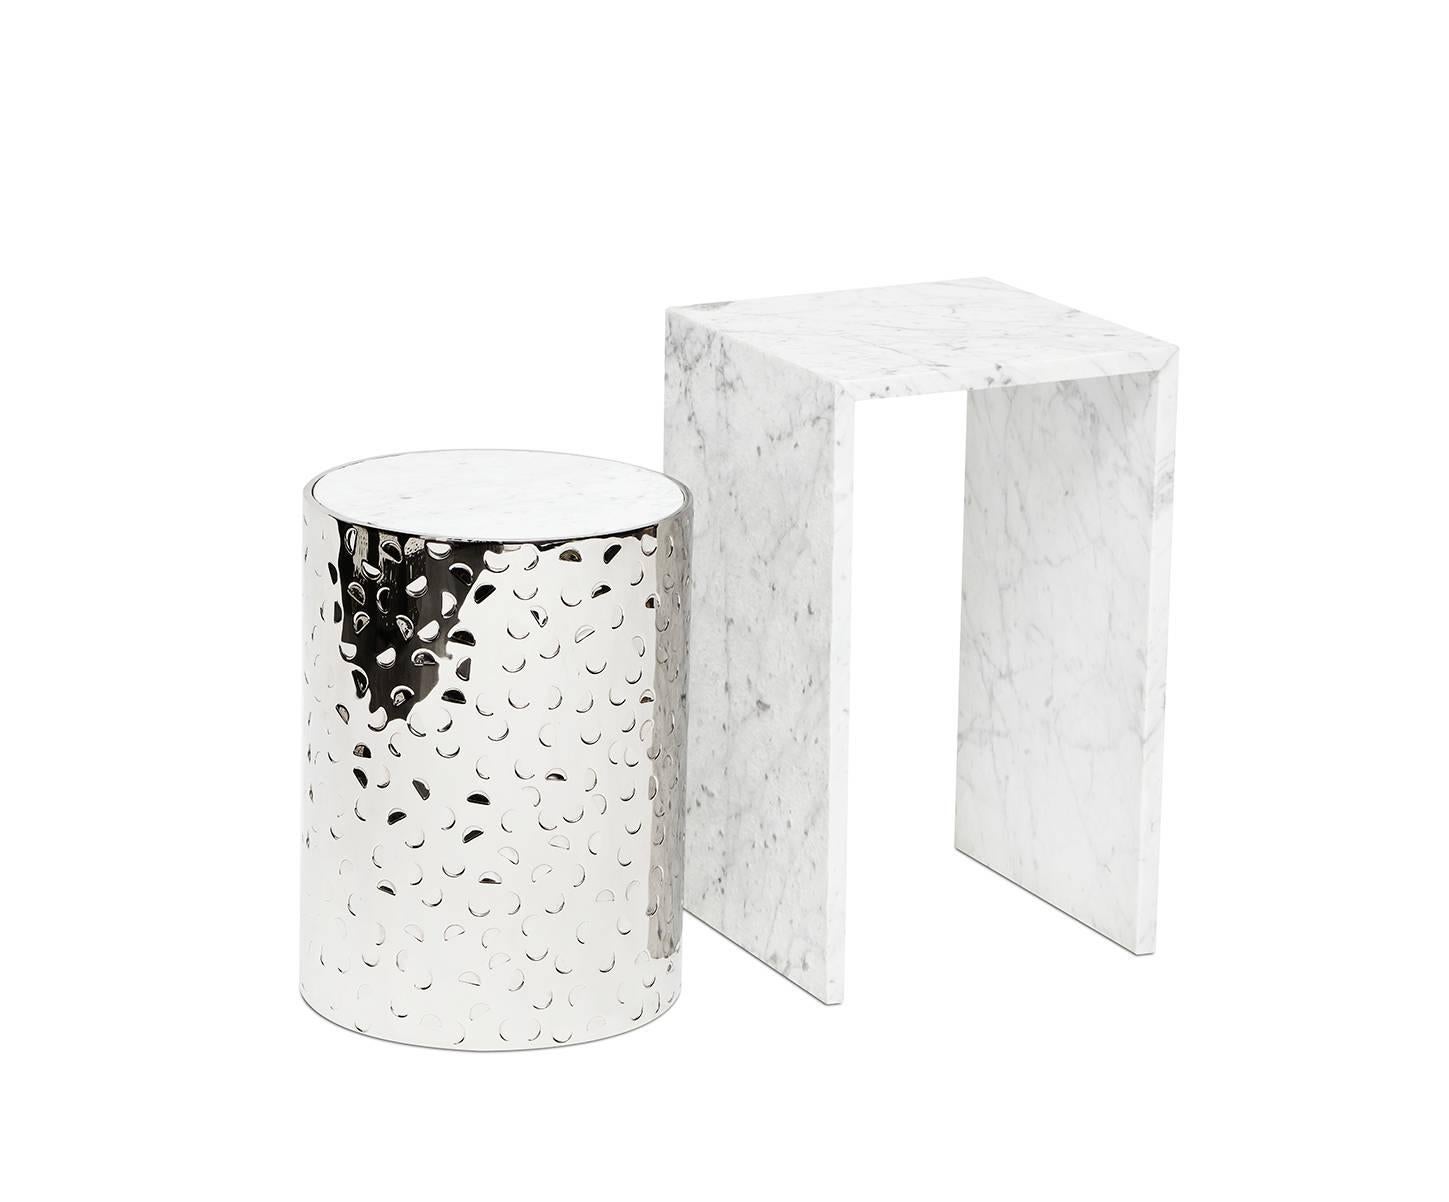 American BIAFO + AIALIK nesting tables - Hand-Hammered Stainless Steel + Marble  For Sale